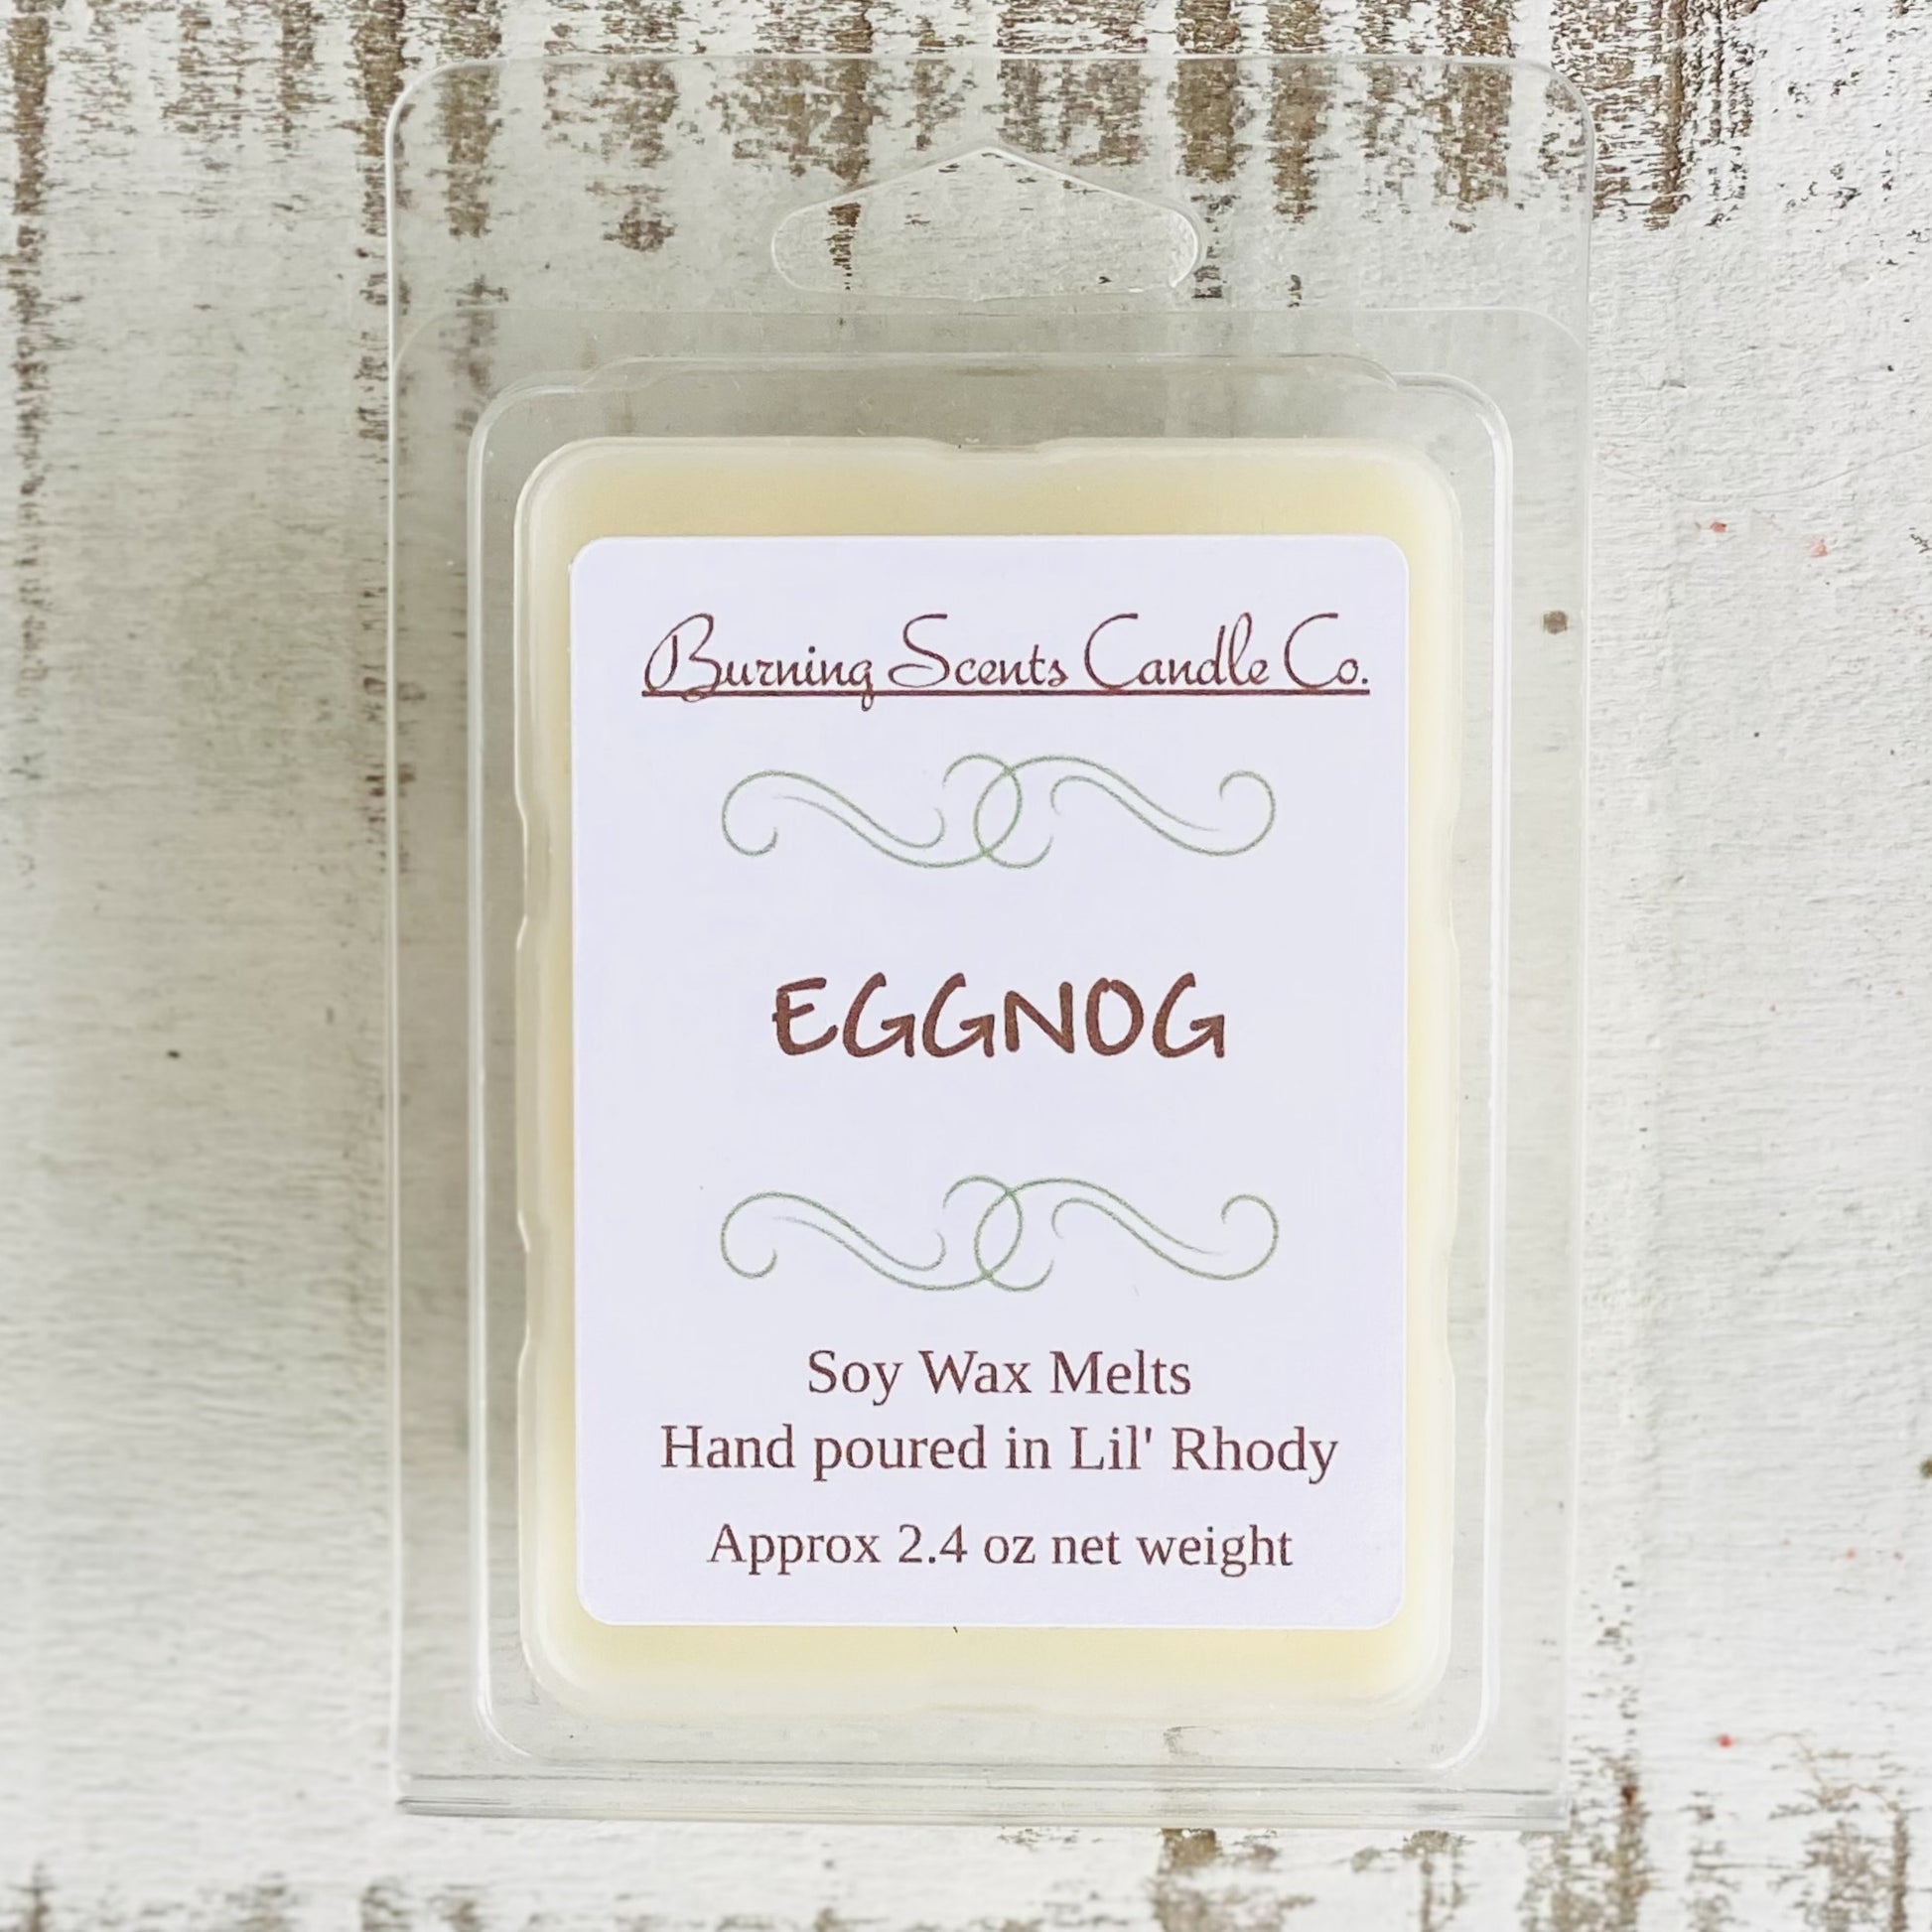 Hand Poured Soy Wax Melts- Eggnog